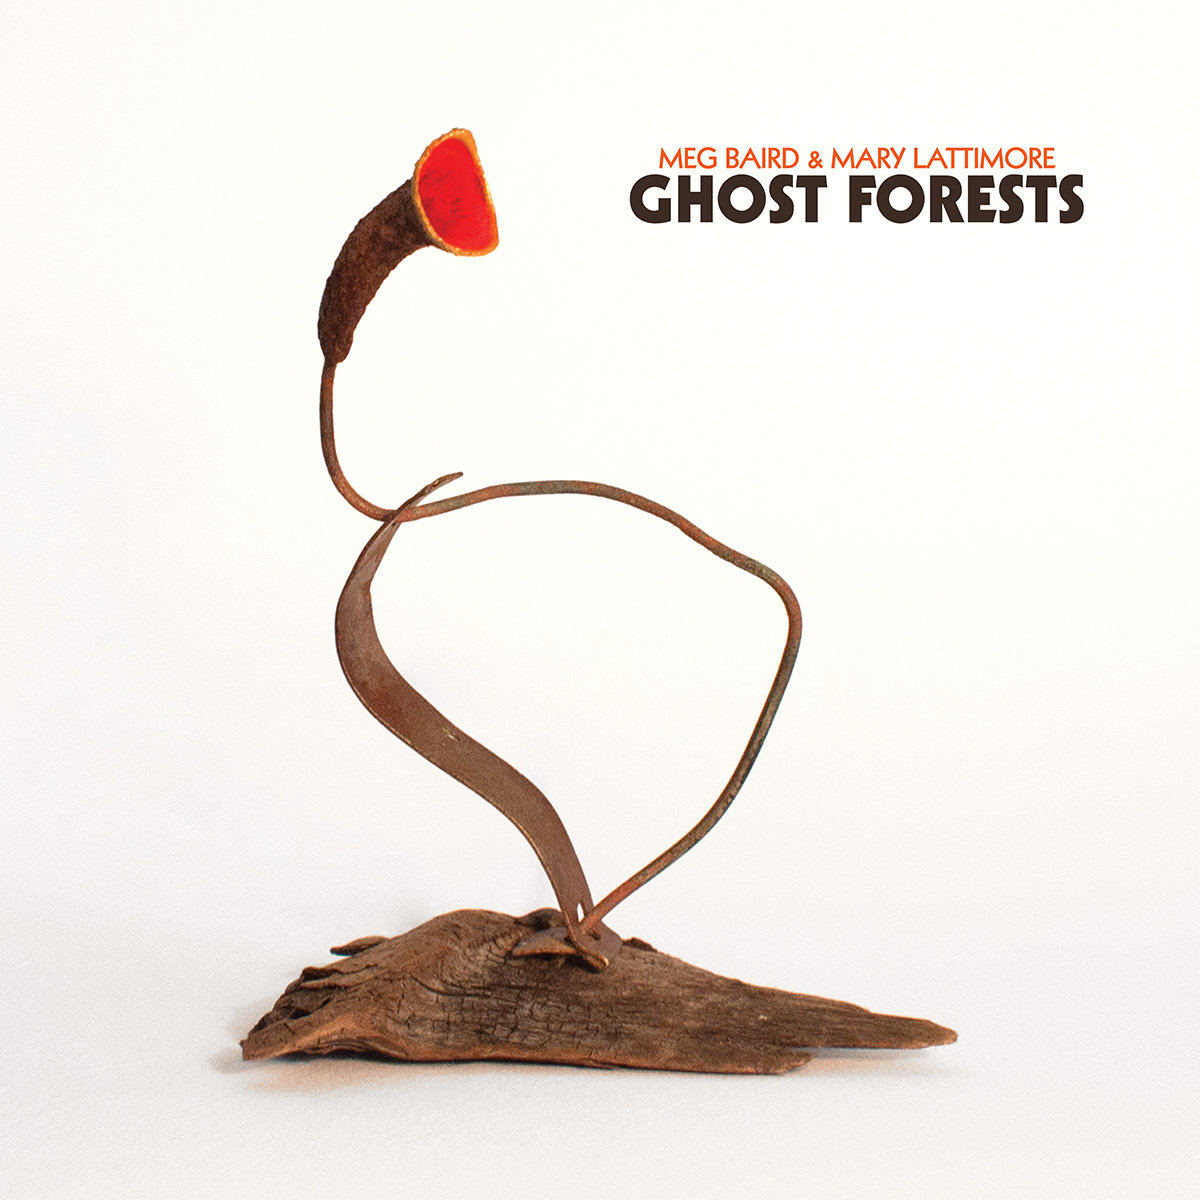 Meg Baird & Mary Lattimore Ghost Forests